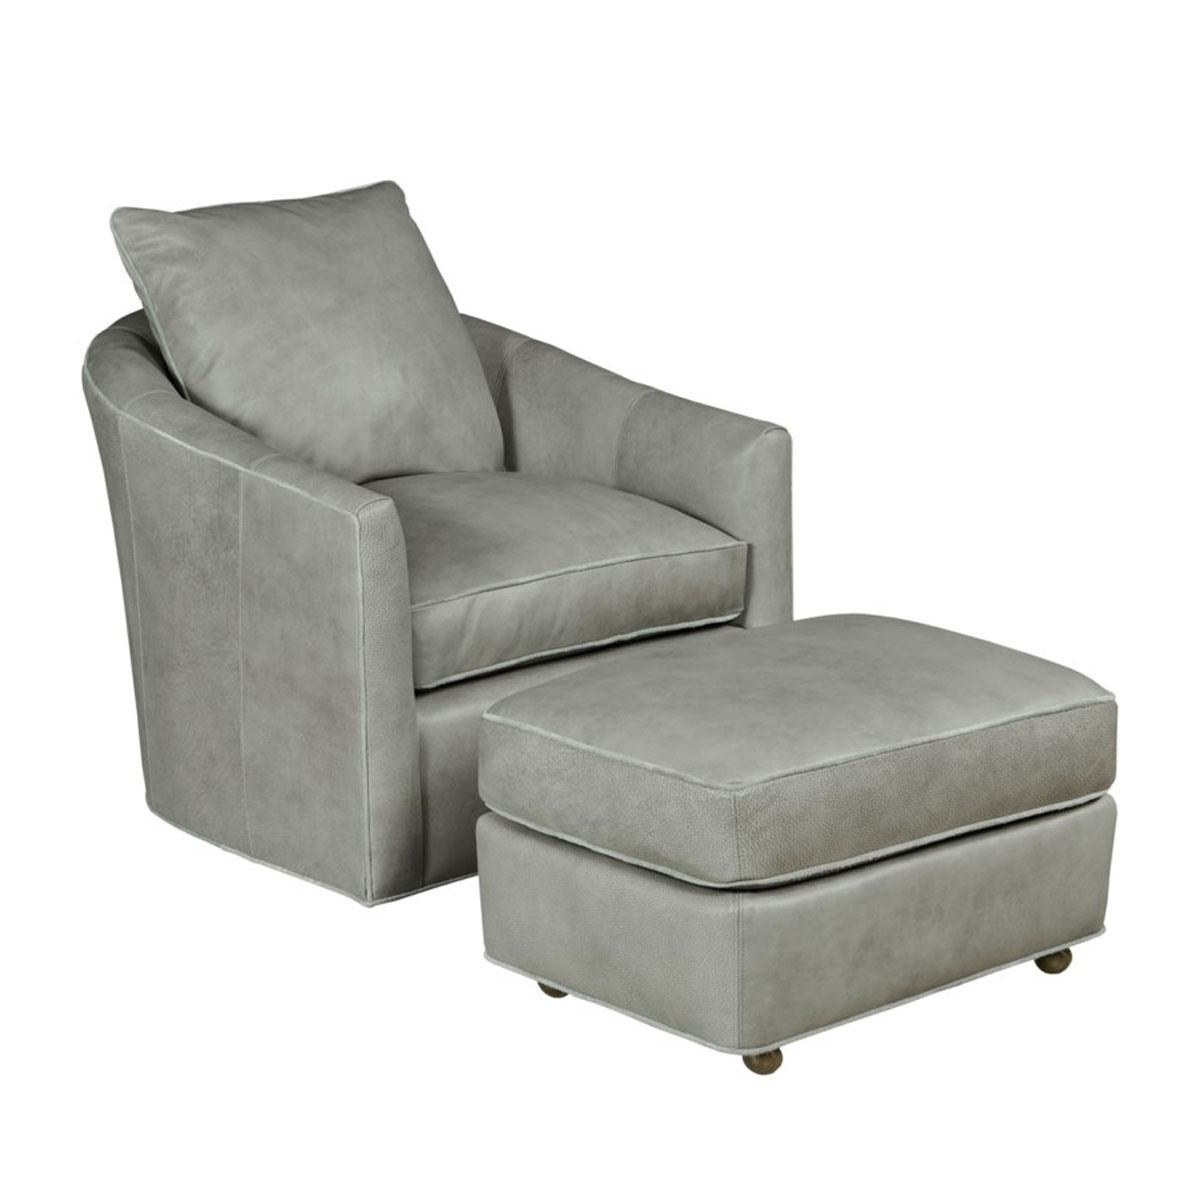 Our House 302-S Bayswater Swivel Chair  and 302C-O Bayswater Caster Ottoman